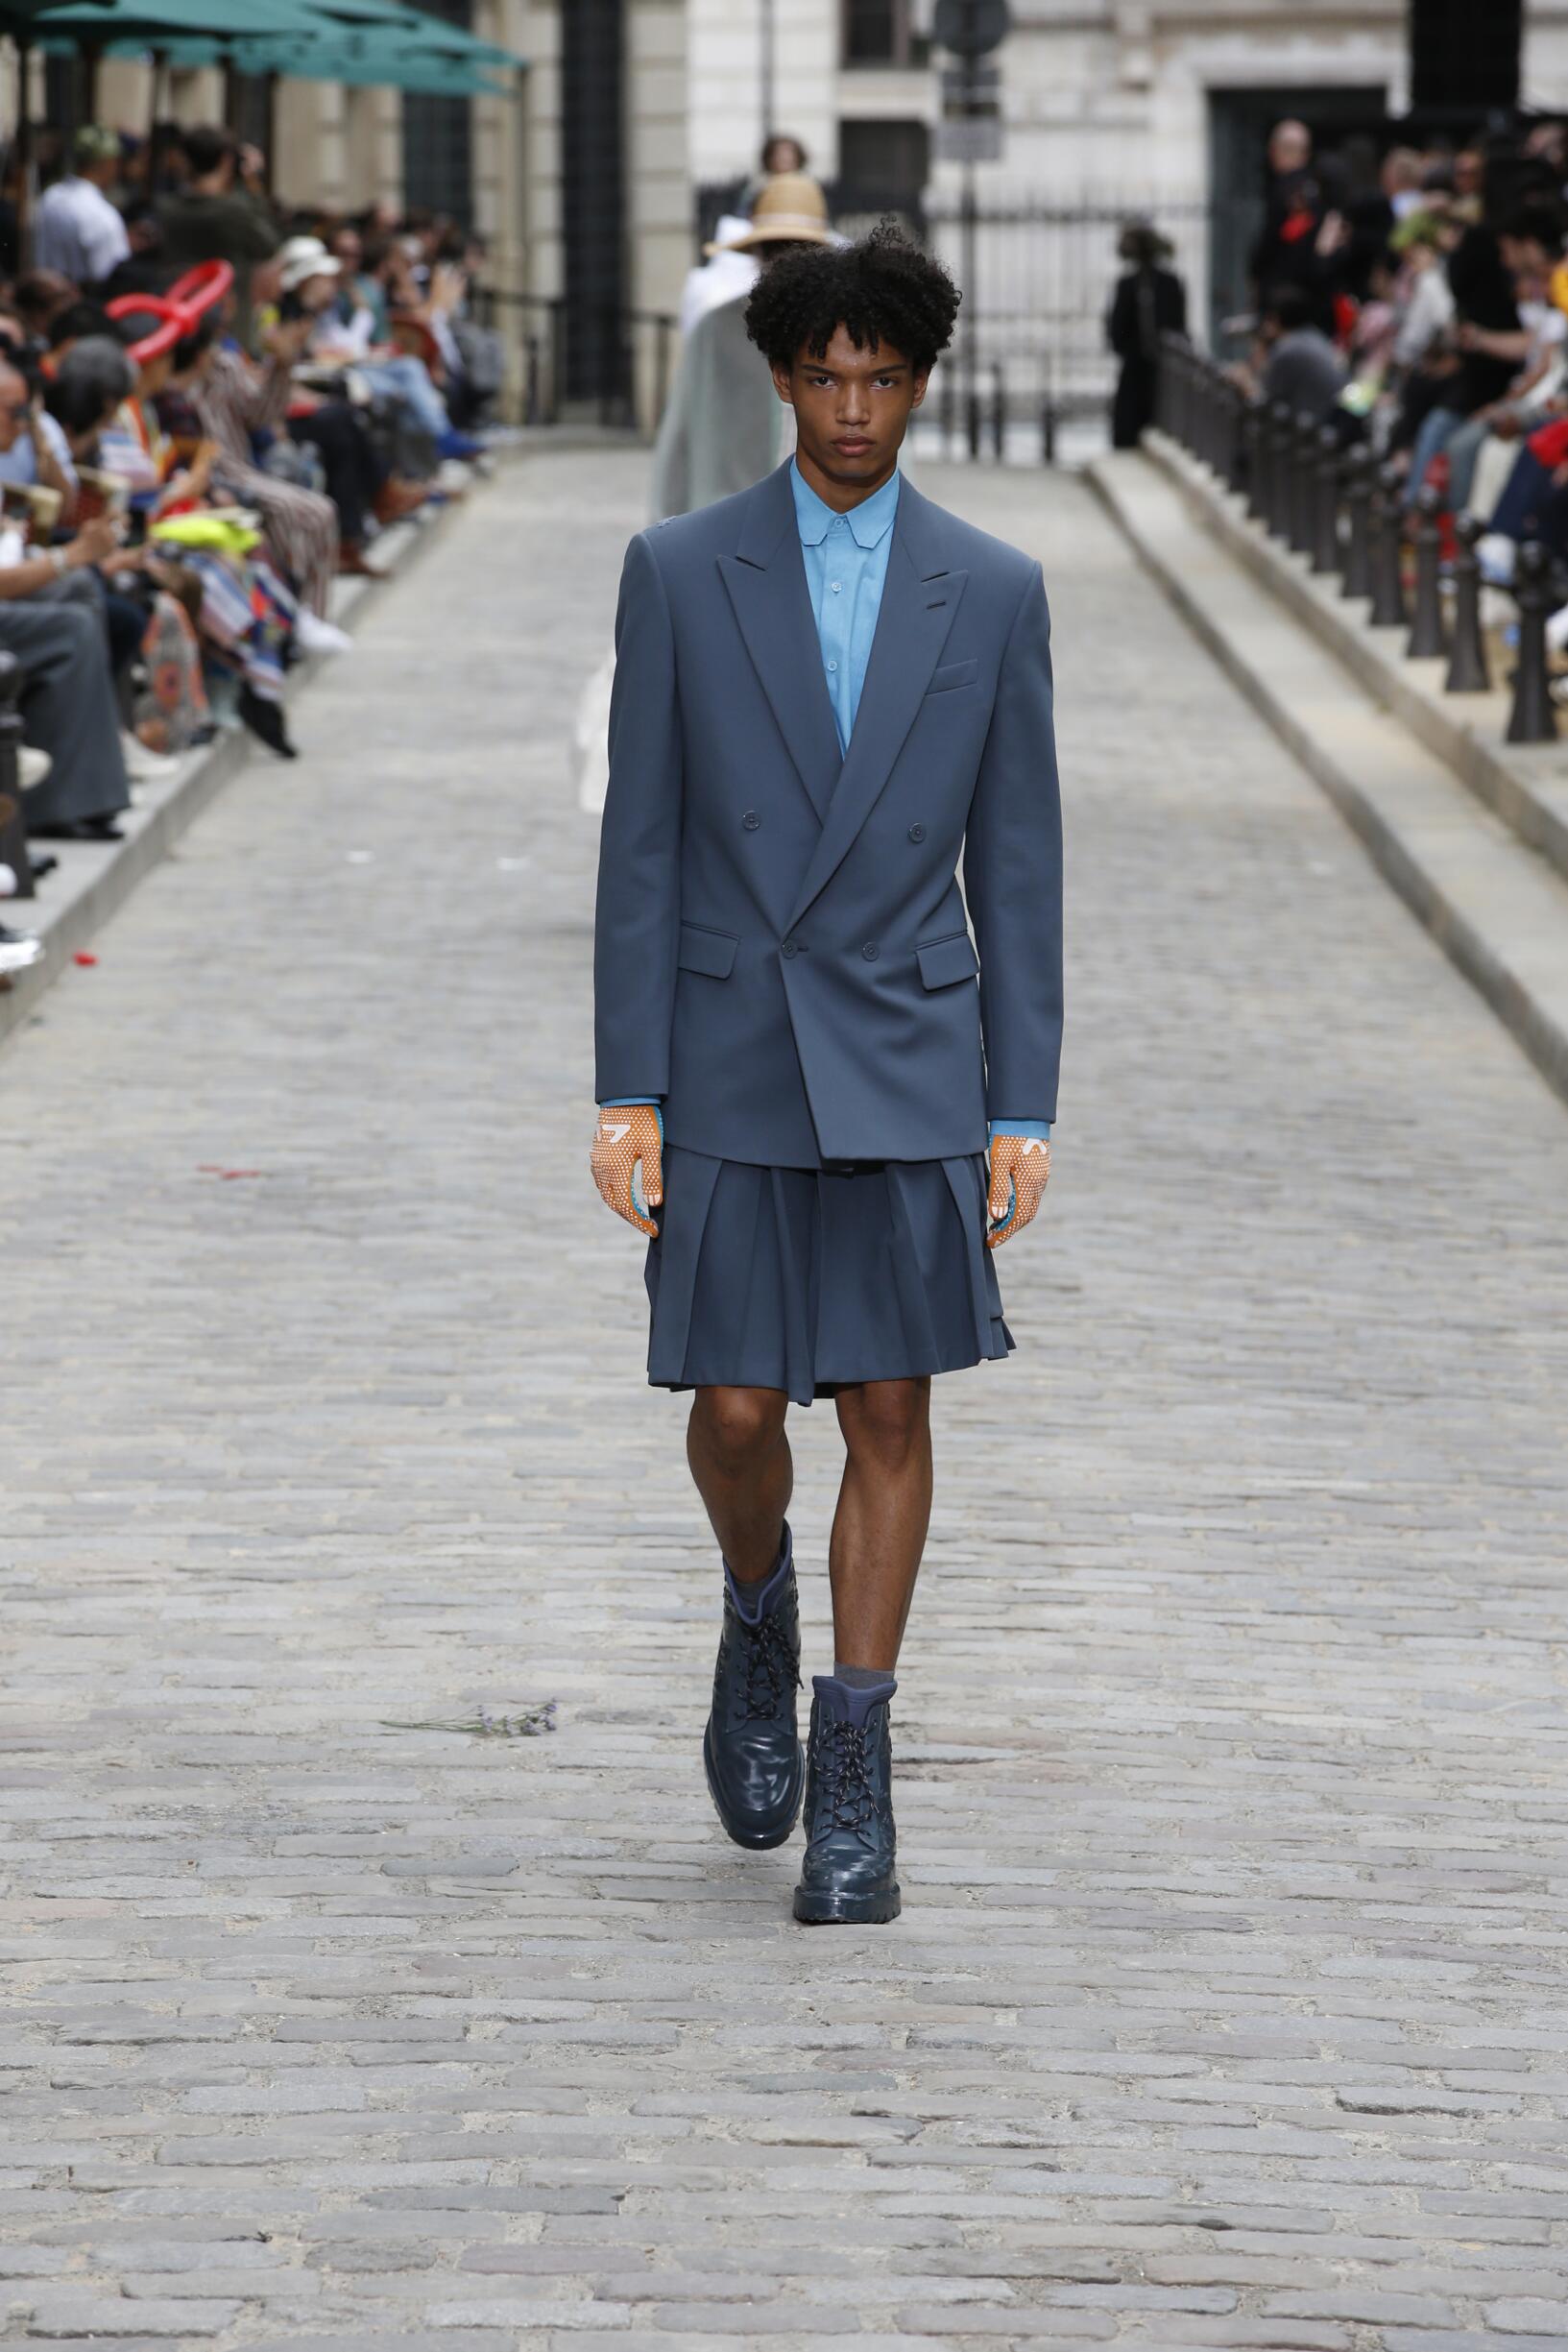 LOUIS VUITTON SPRING SUMMER 2020 MEN’S COLLECTION | The Skinny Beep